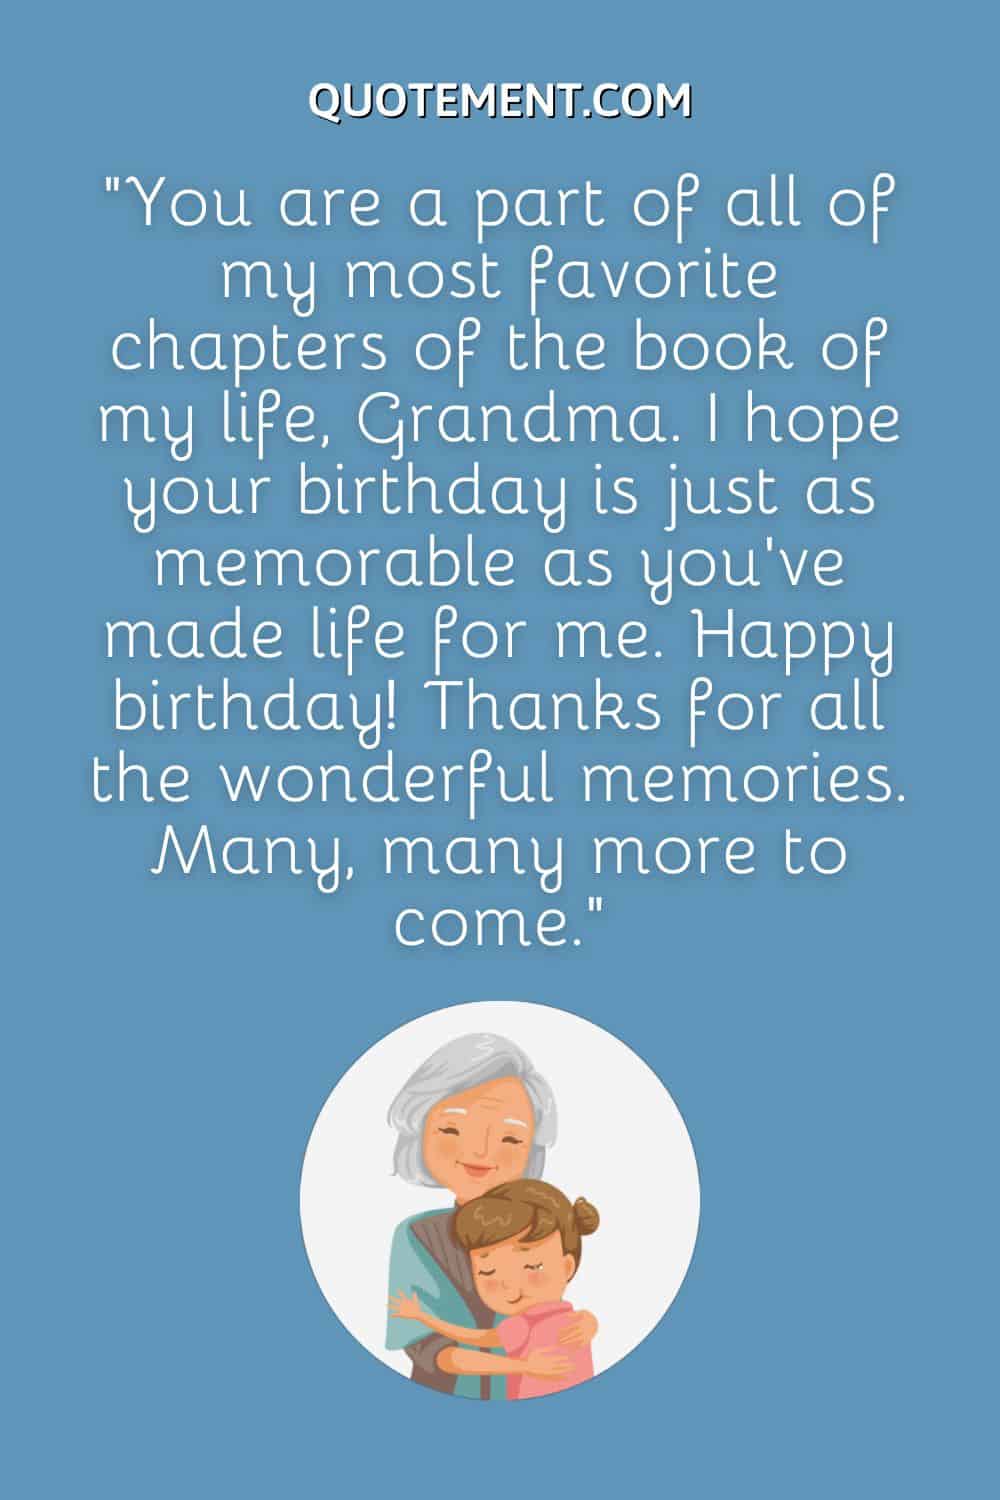 You are a part of all of my most favorite chapters of the book of my life, Grandma.